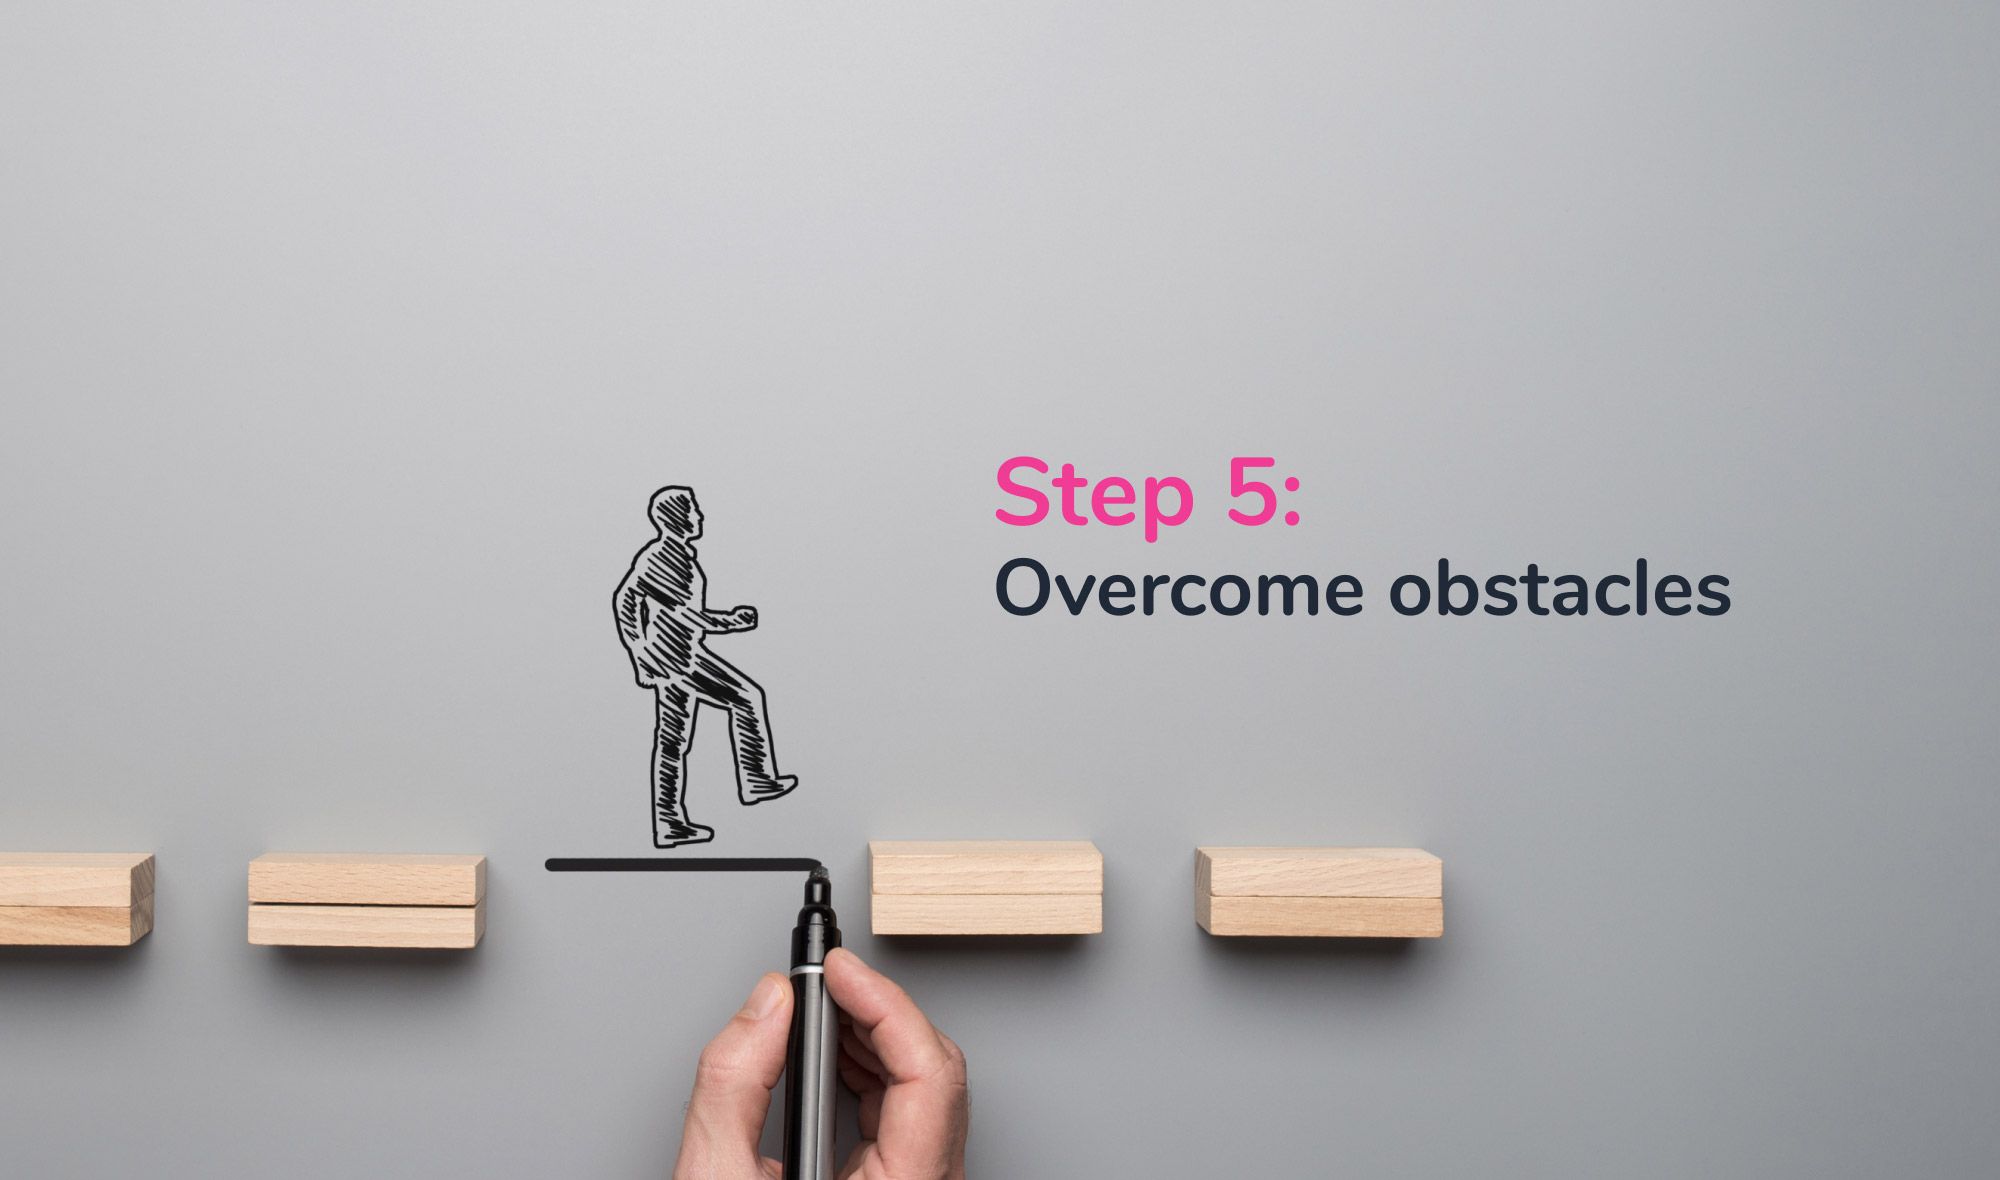 Your guide to a better future - Step 5: Overcome obstacles